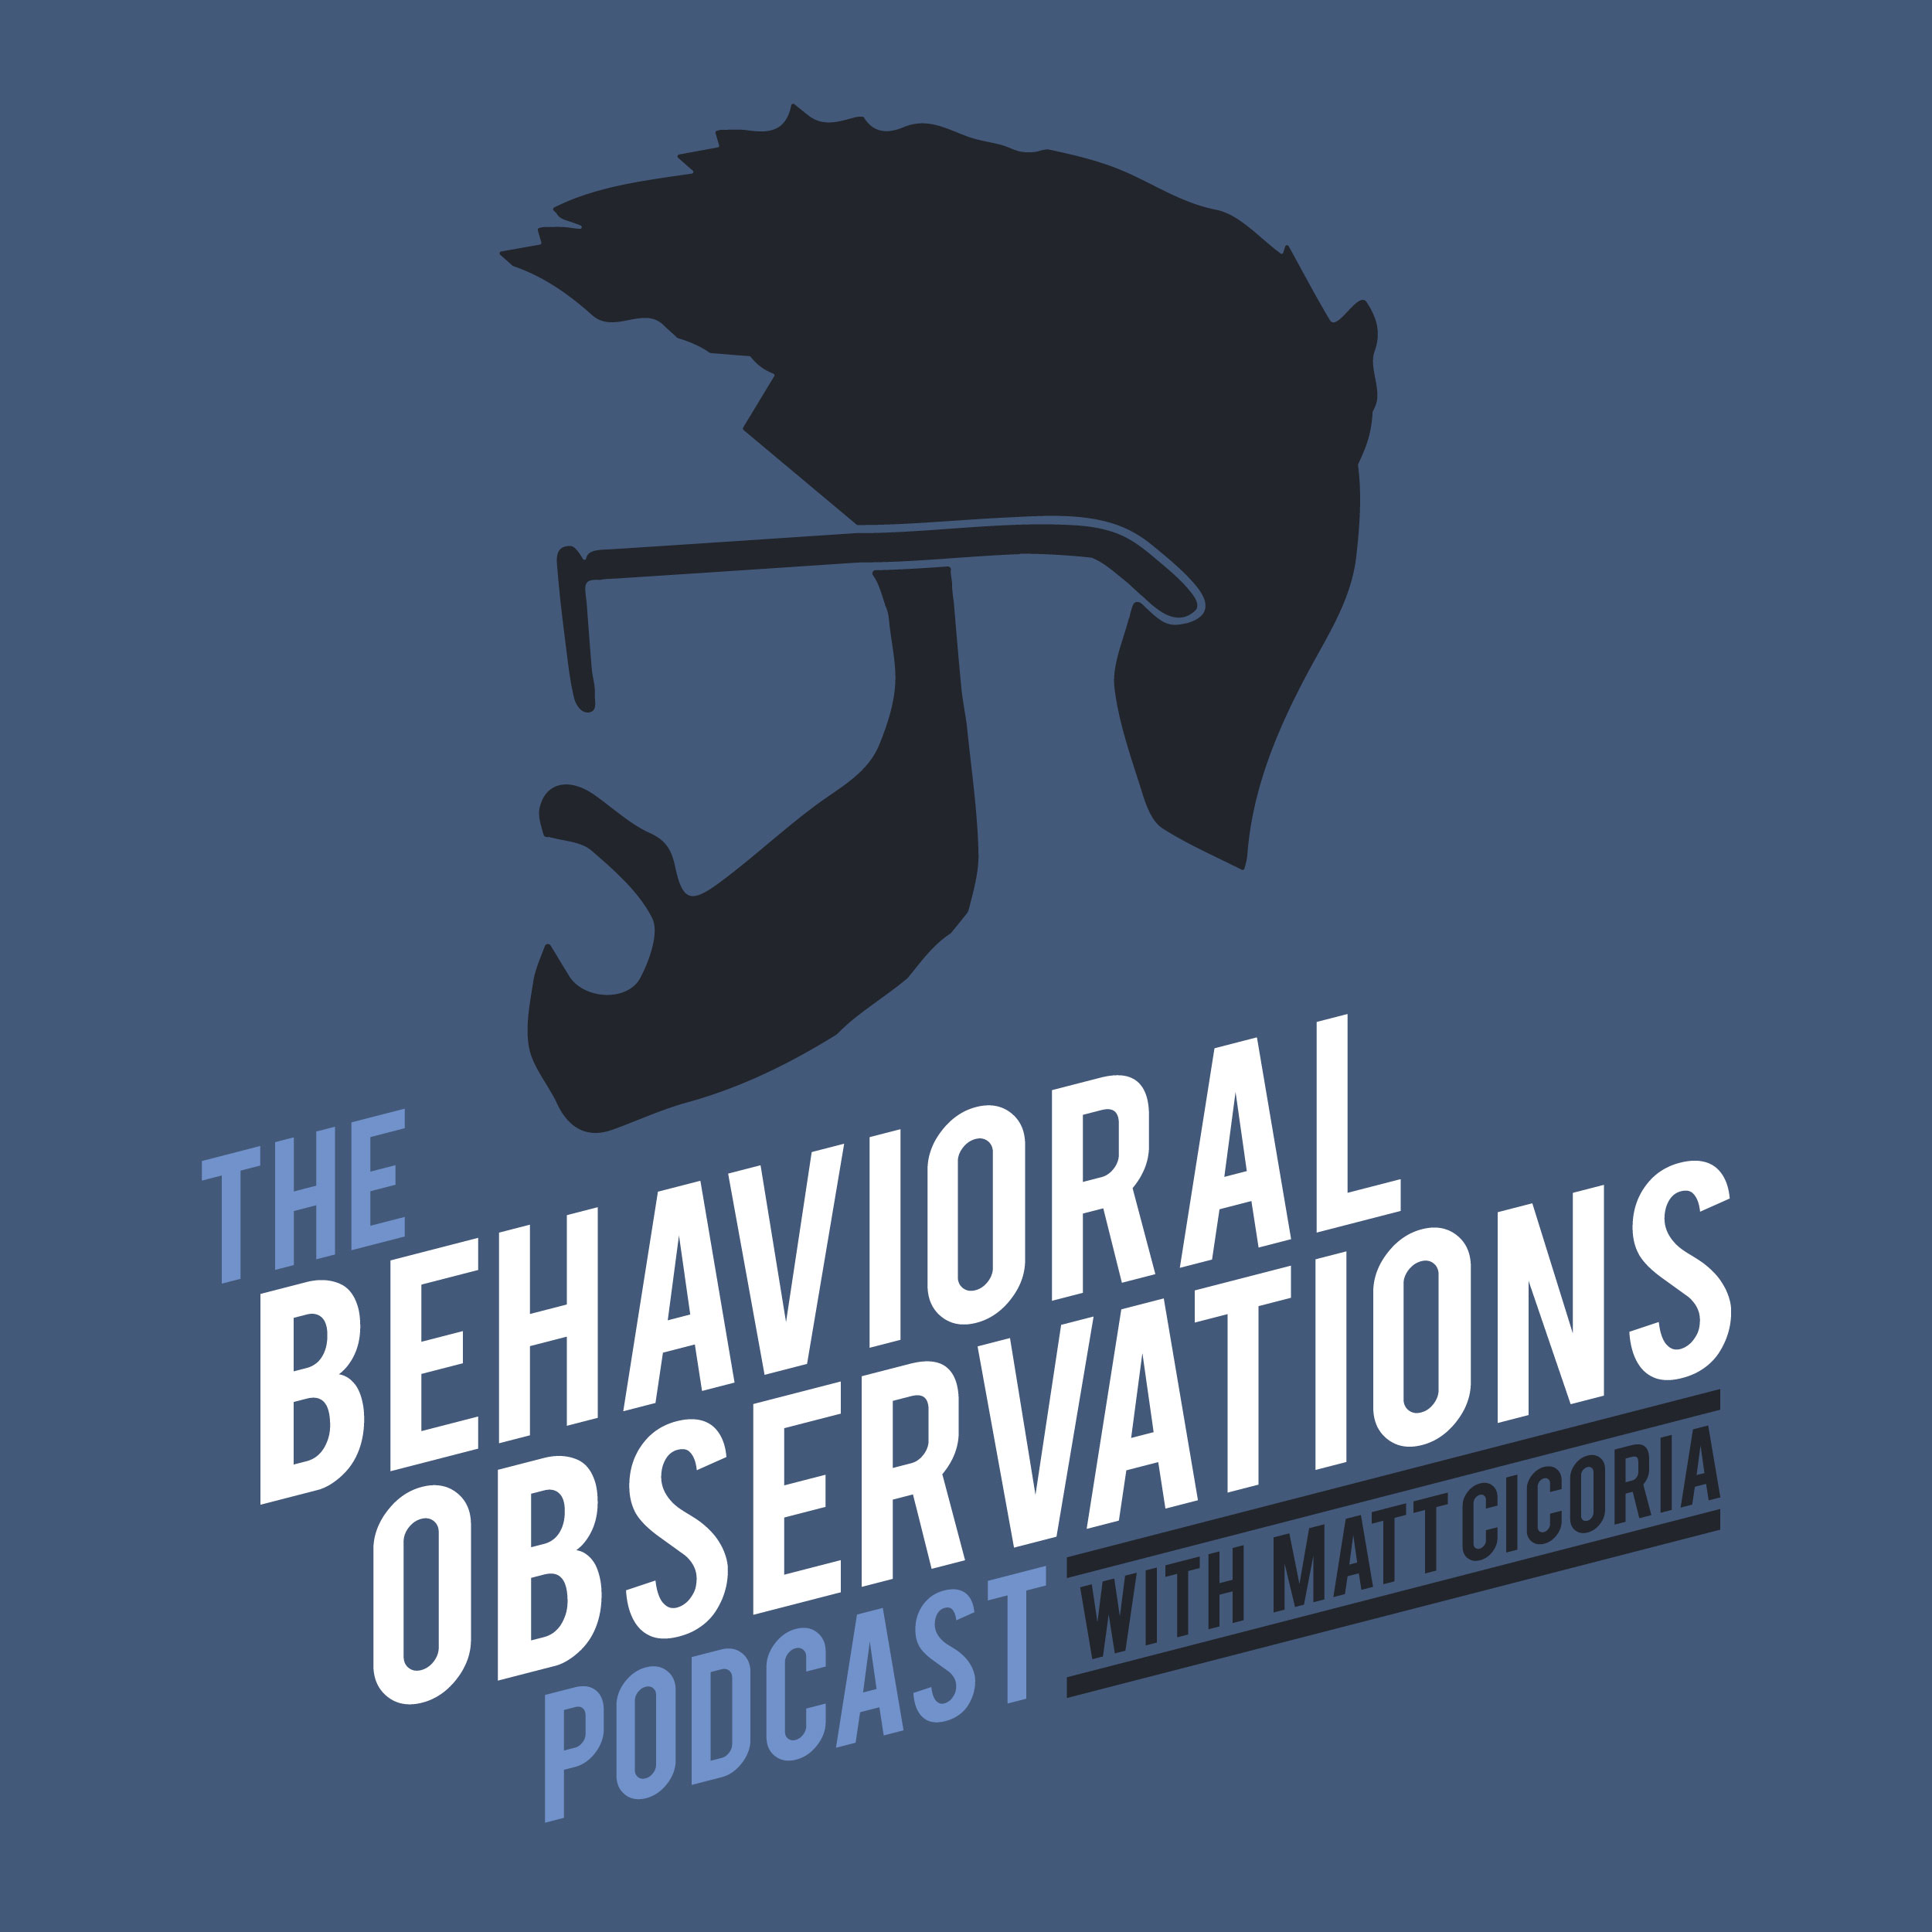 logo of the behavioral observation podcast it's a blue background with white letters and black image.